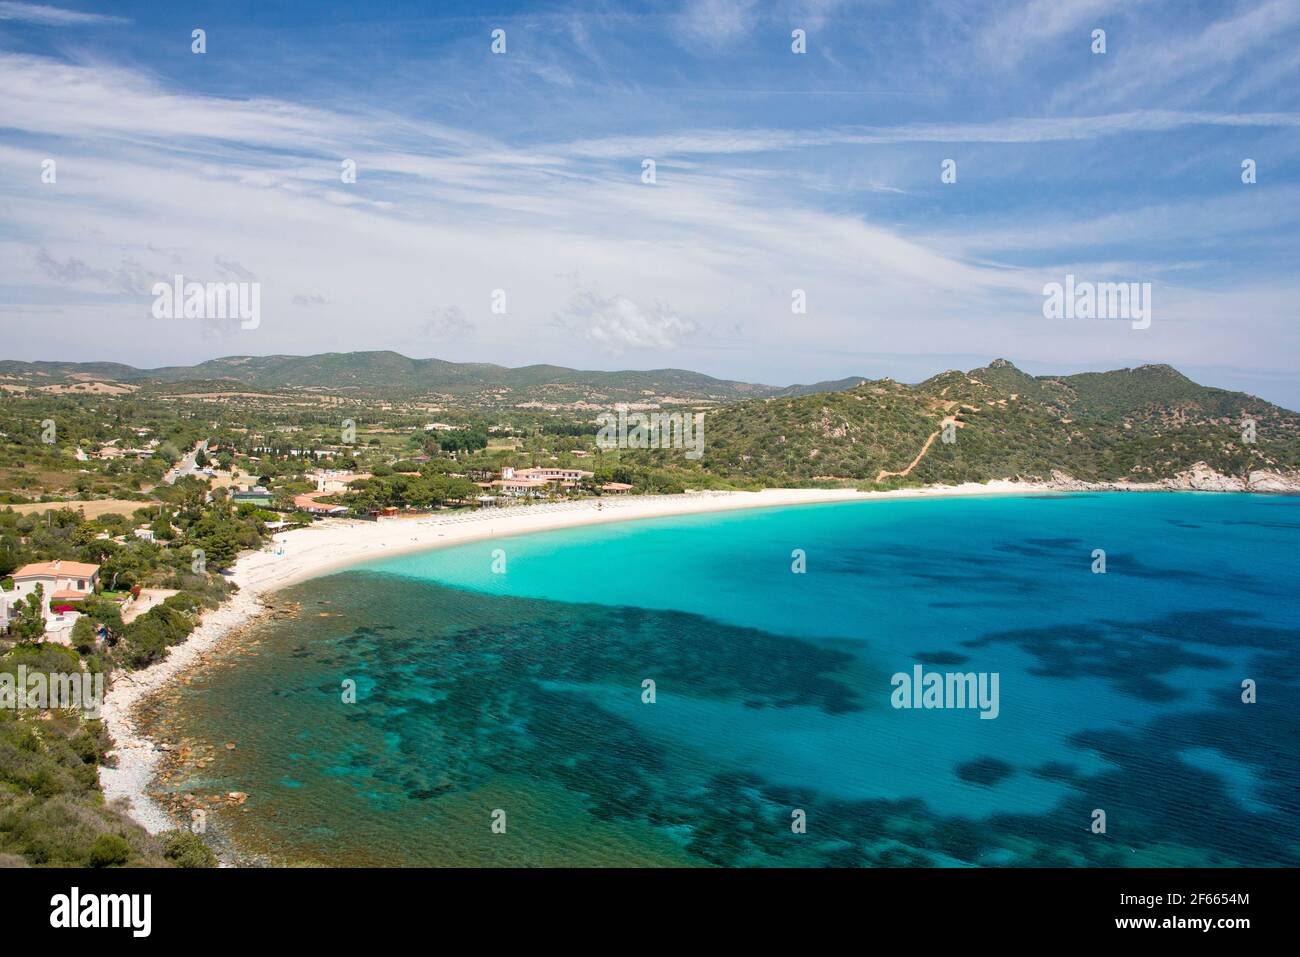 crystal clear and tropical water at Campus beach, Villasimius Stock Photo